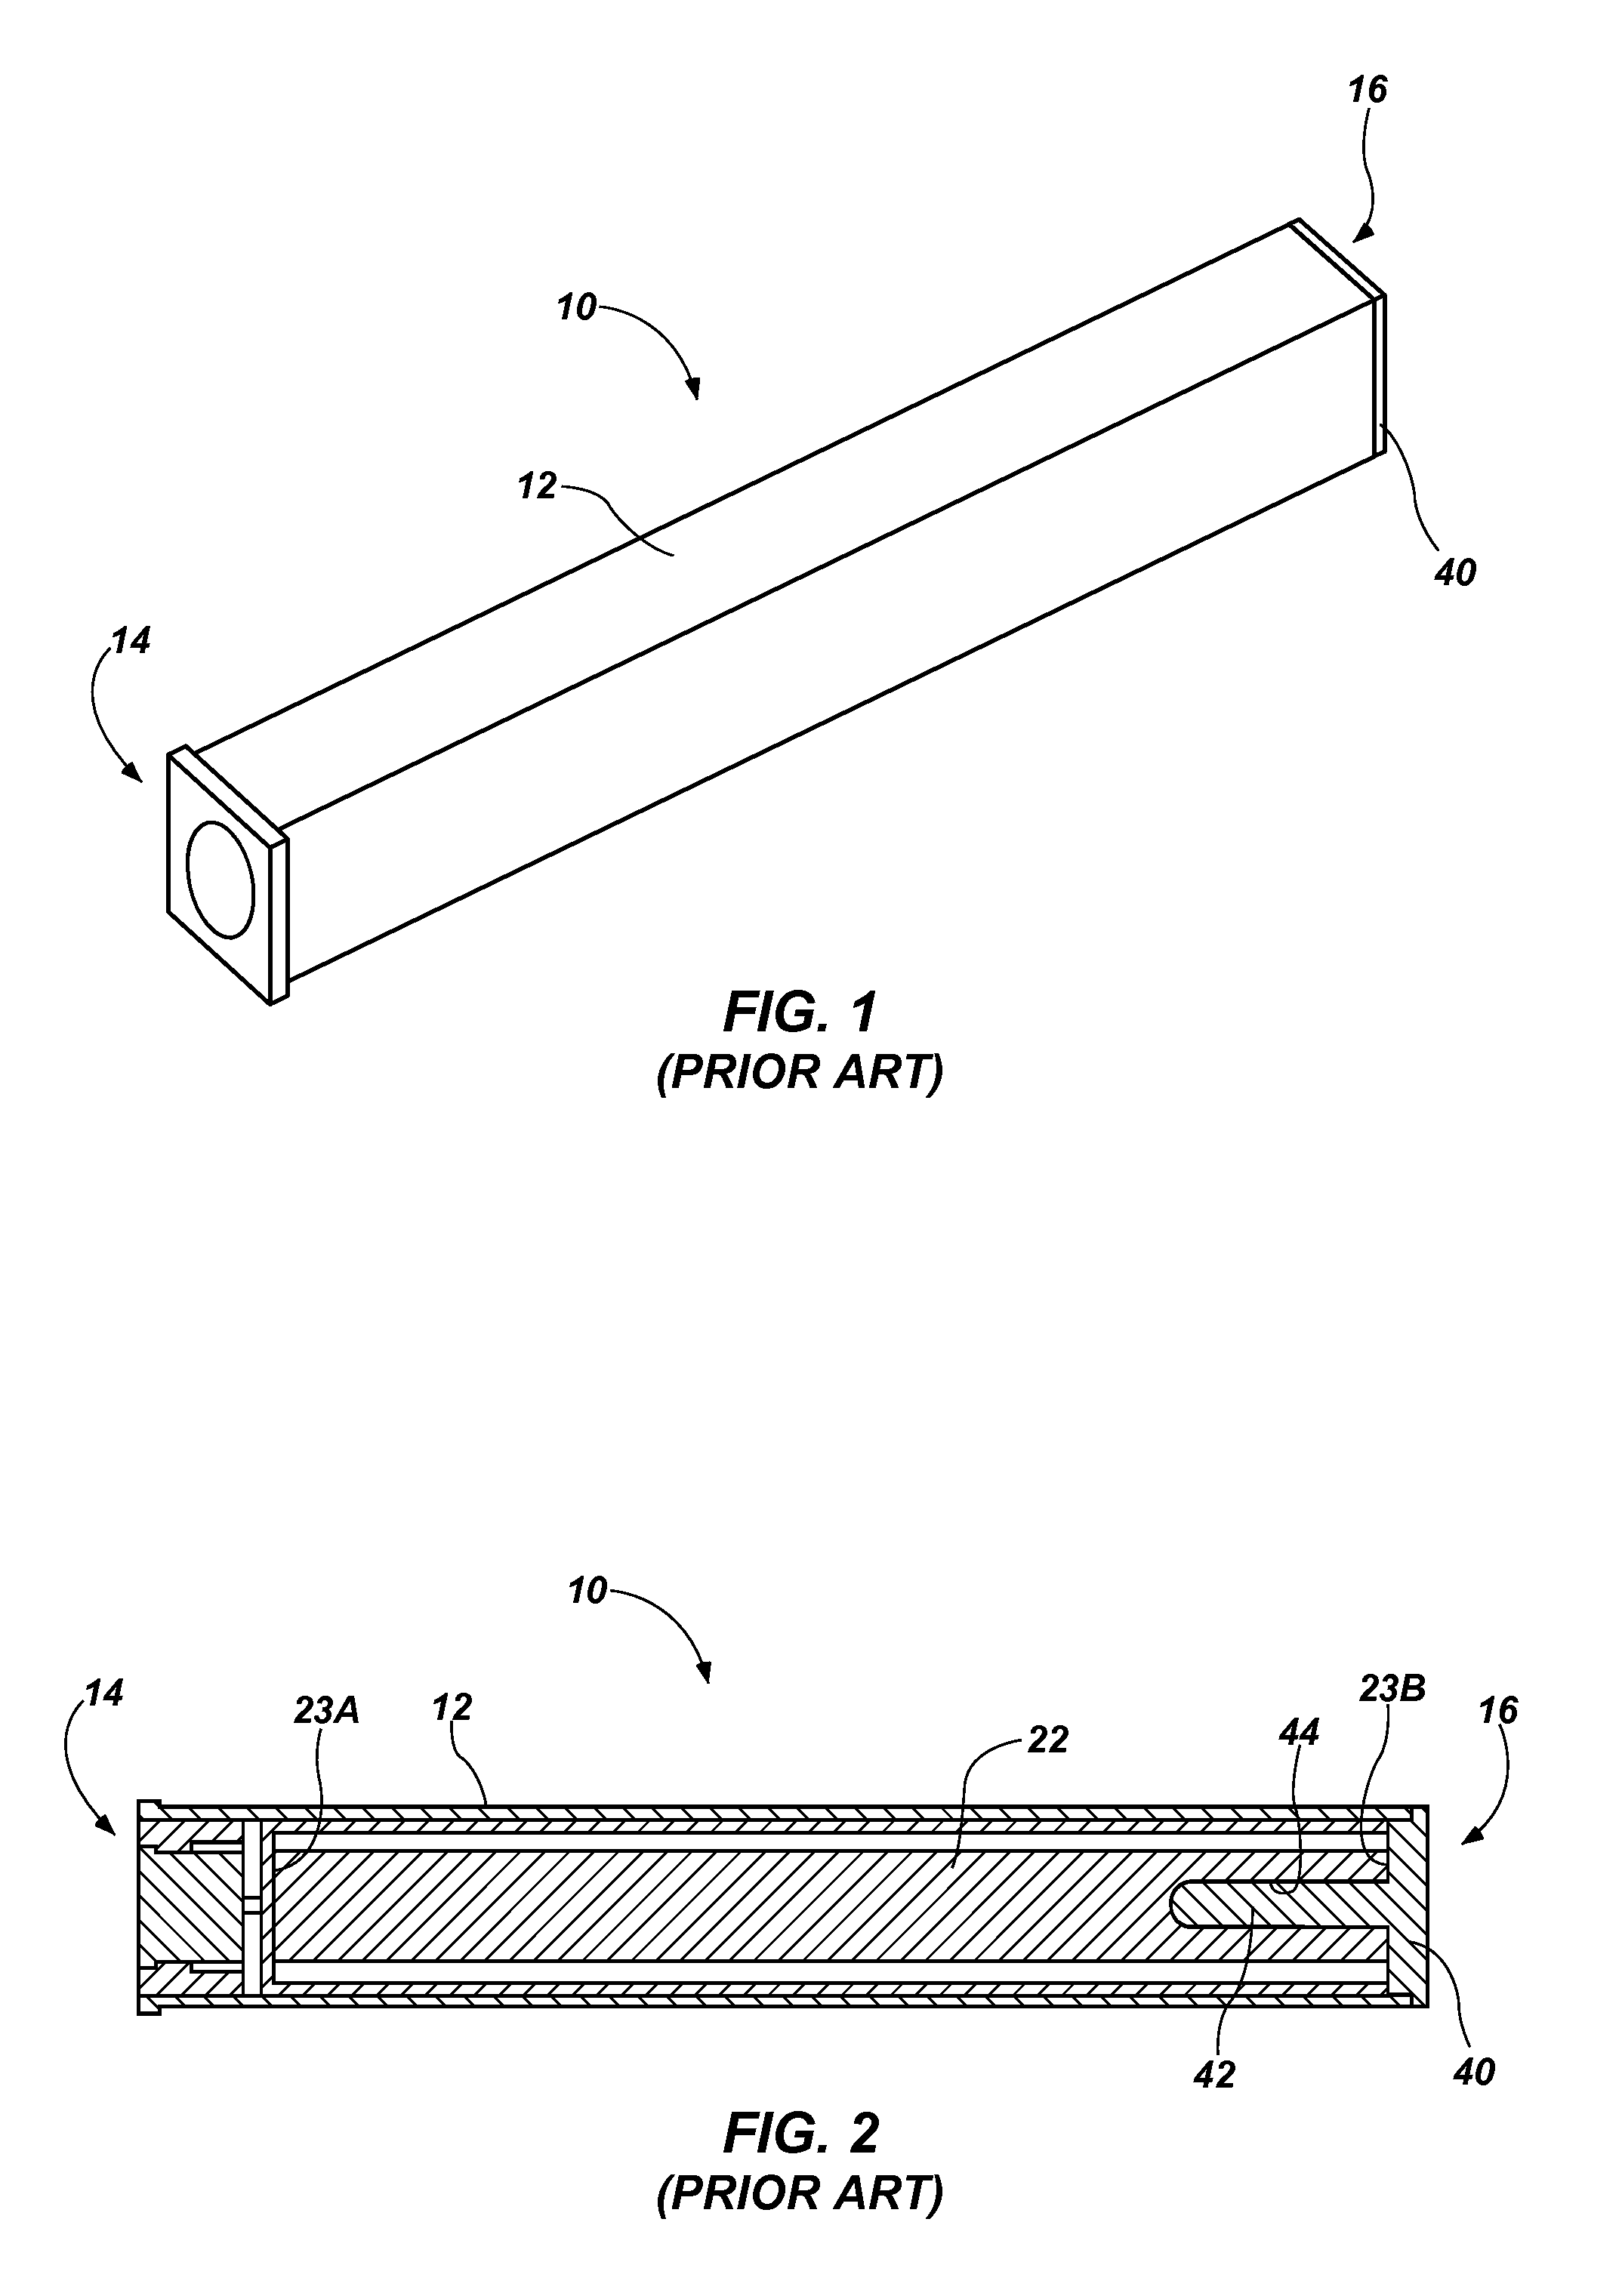 Flares, consumable weight components thereof, and methods of fabrication and use